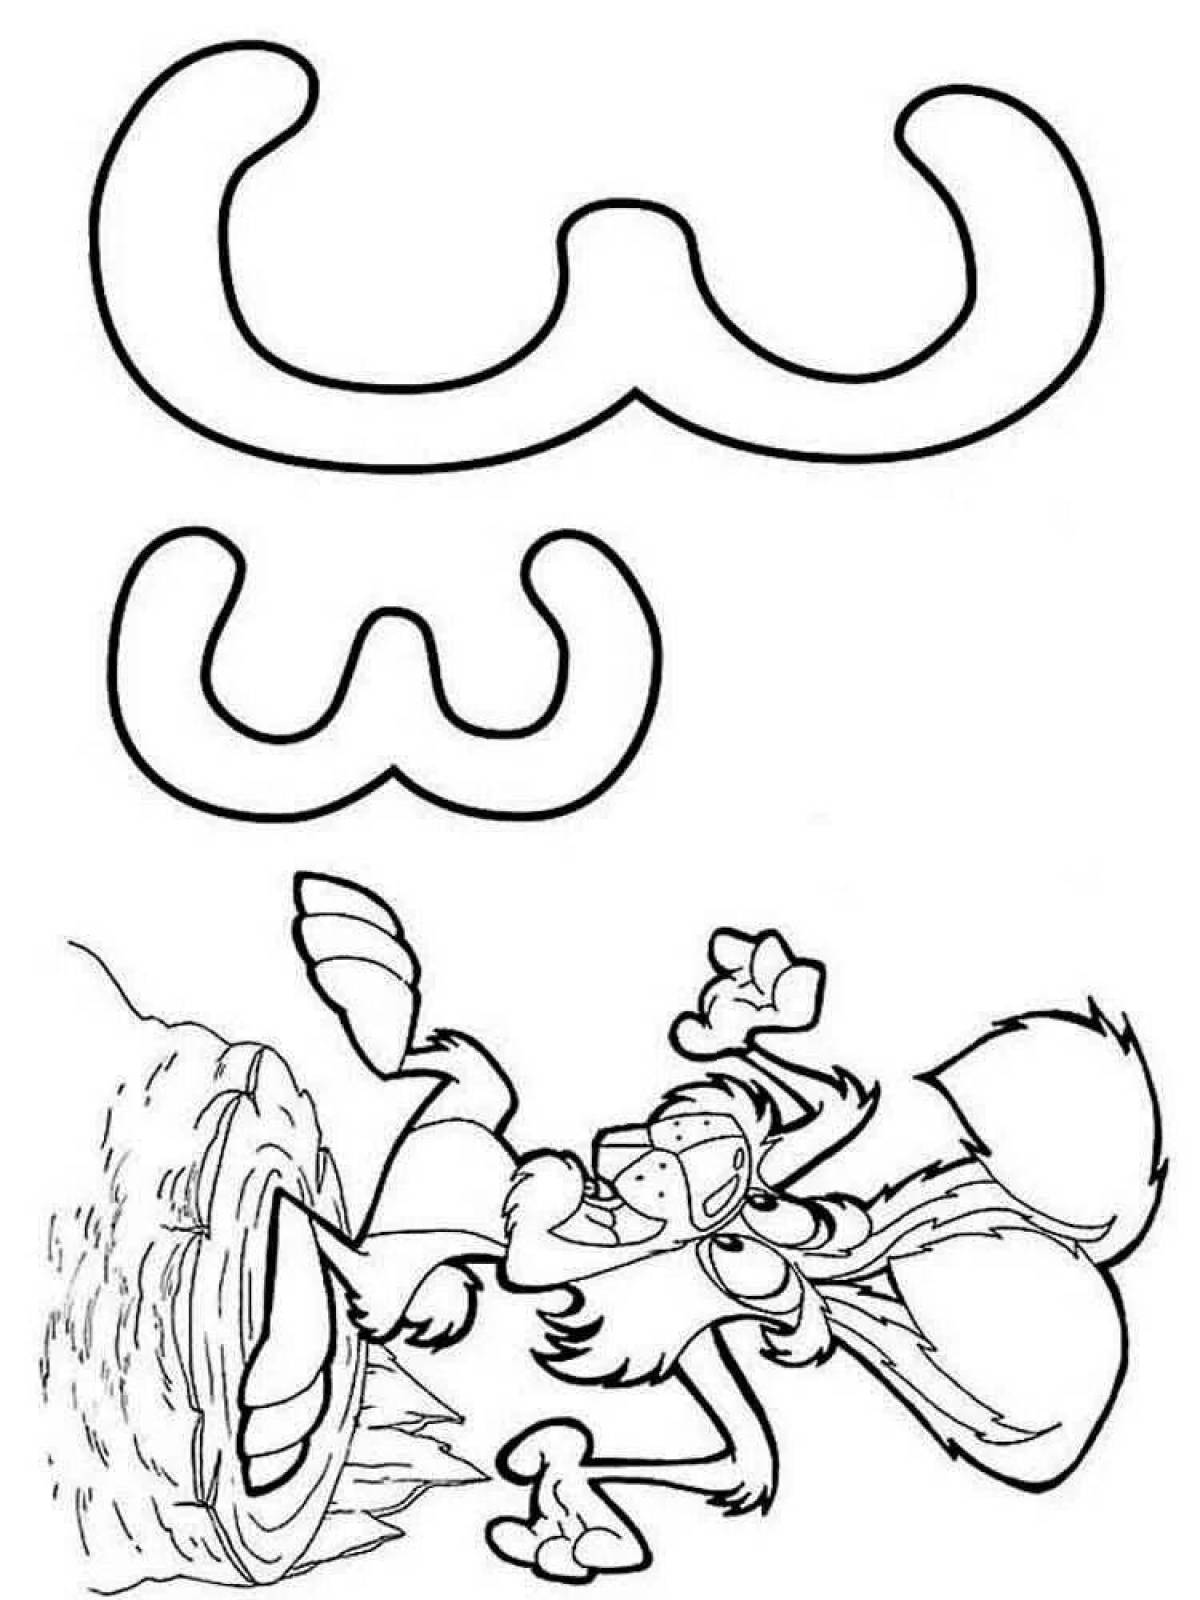 Threatening coloring pages evil letters